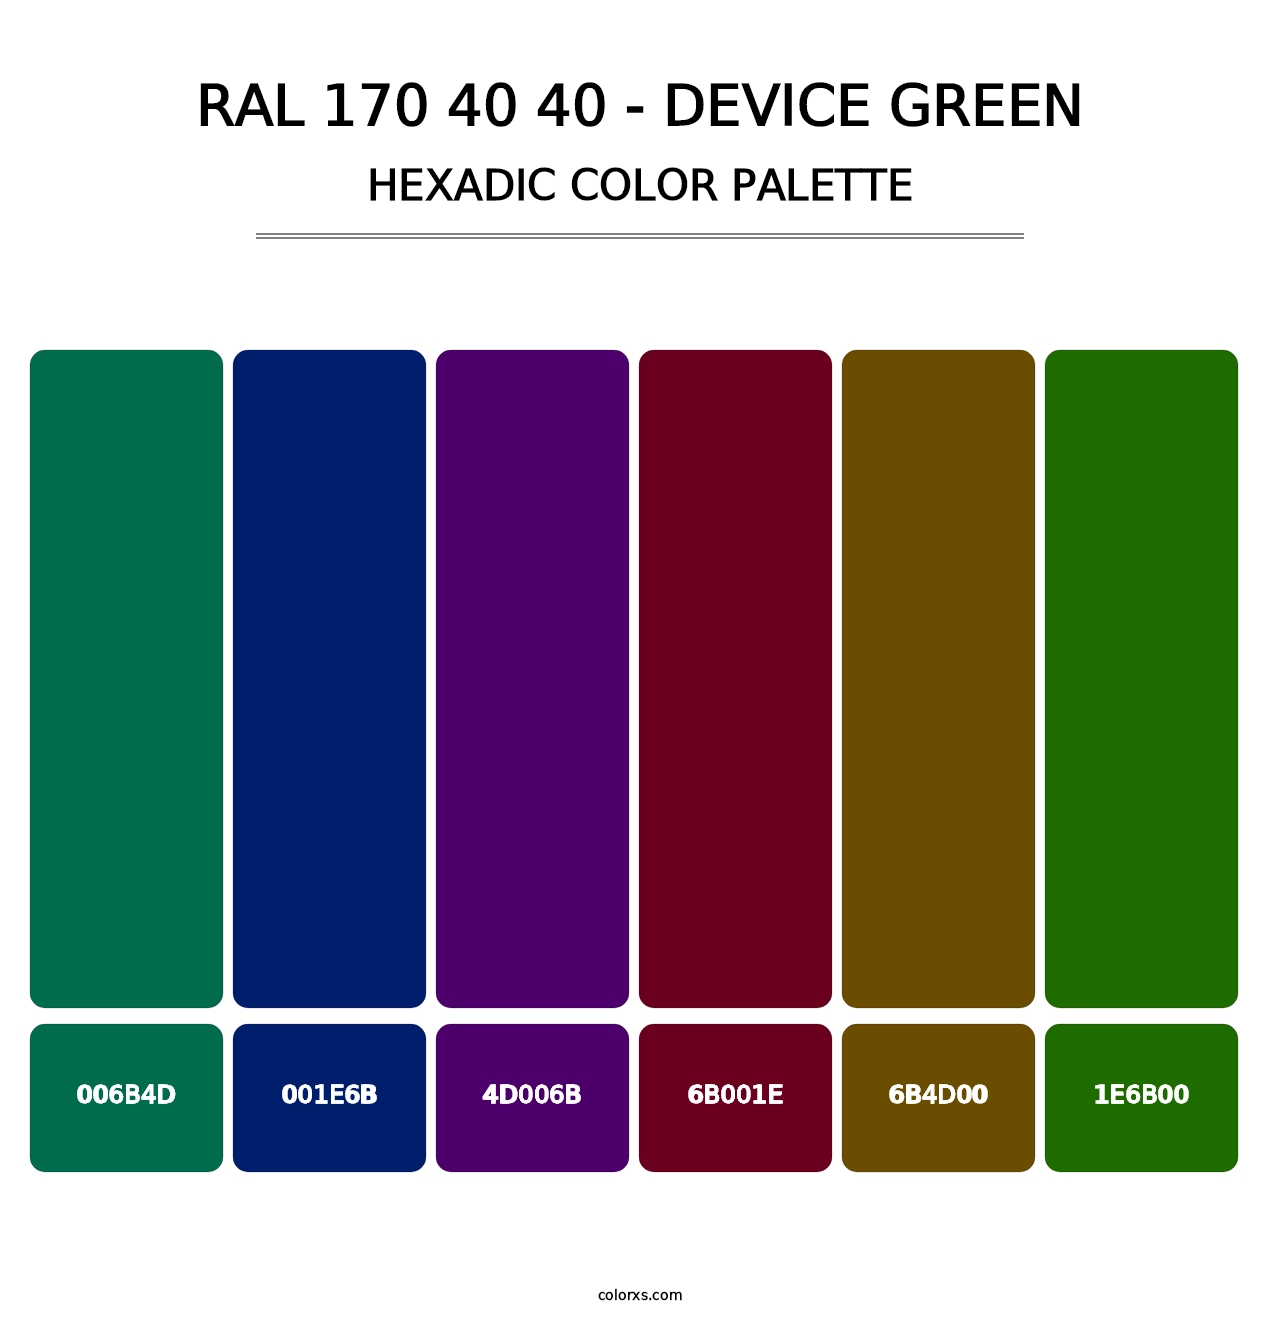 RAL 170 40 40 - Device Green - Hexadic Color Palette